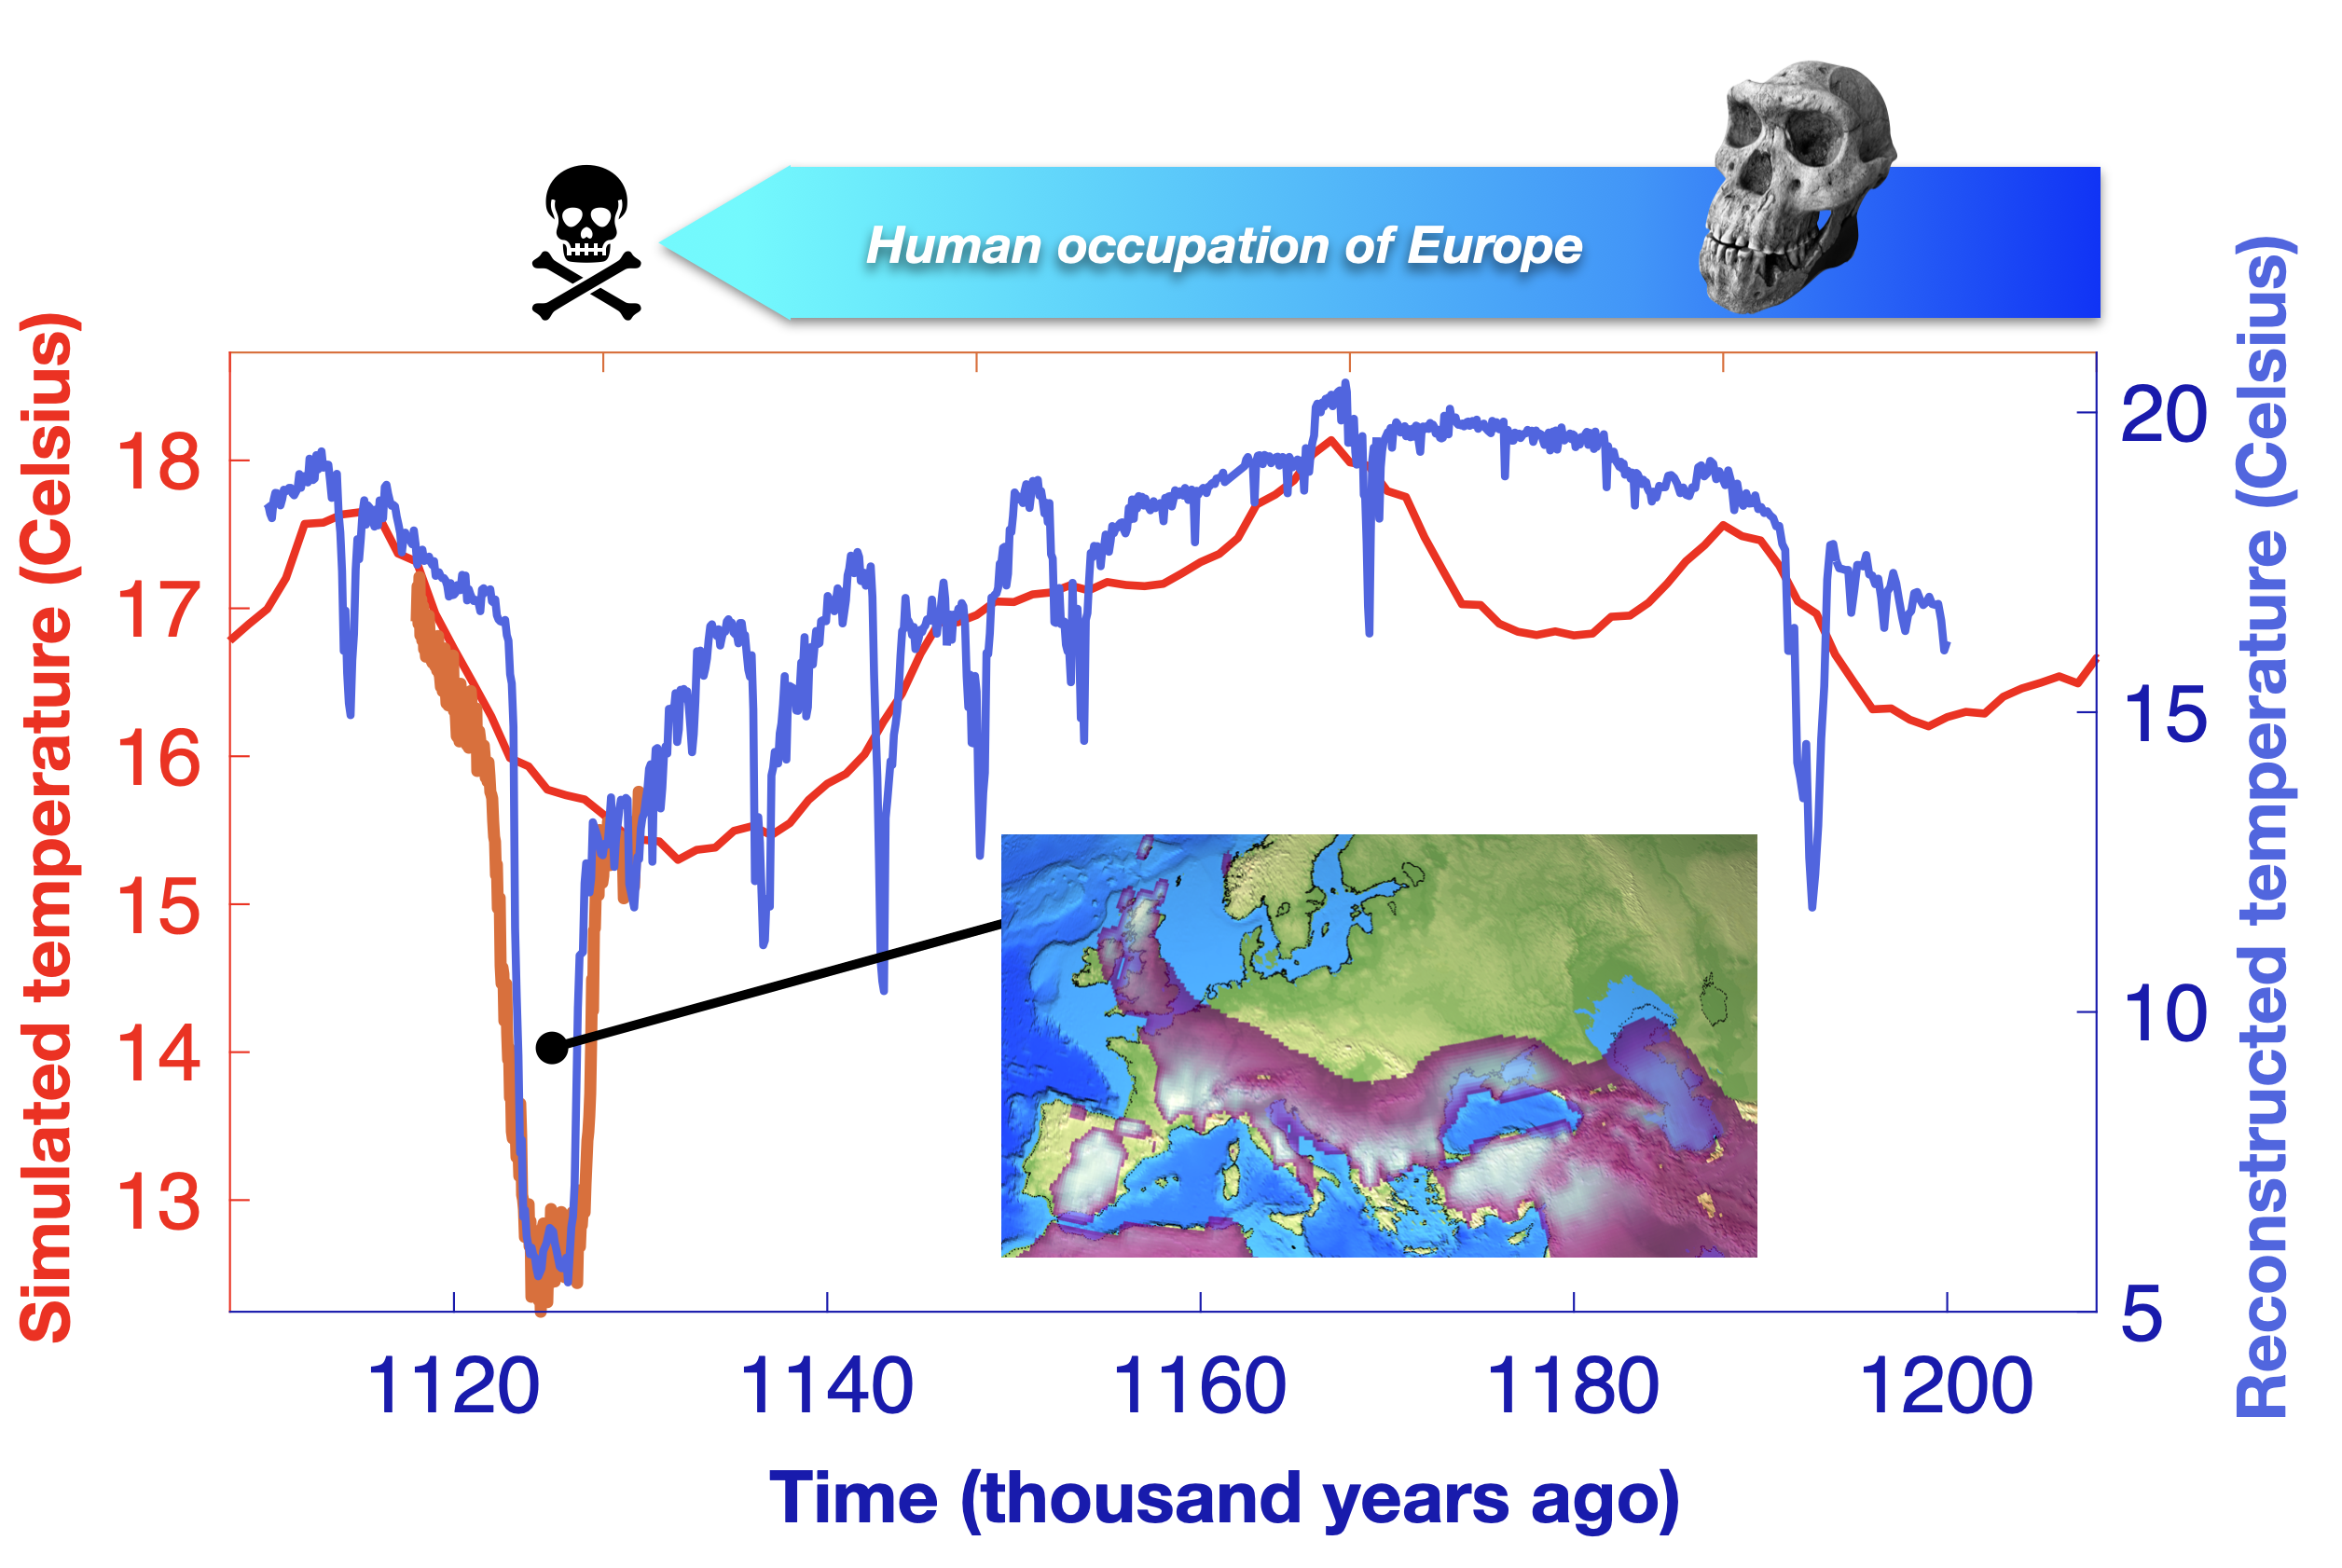 Fig. 1: North Atlantic cooling event 1.127 million years ago, which contributed to the depopulation of Southern Europe. (Photo credit Homo erectus skull, Axel Timmermann). Pink shading in map highlights areas, where early human species suffered a major reduction in habitat suitability due to cooling, drying and reduction in food resources.